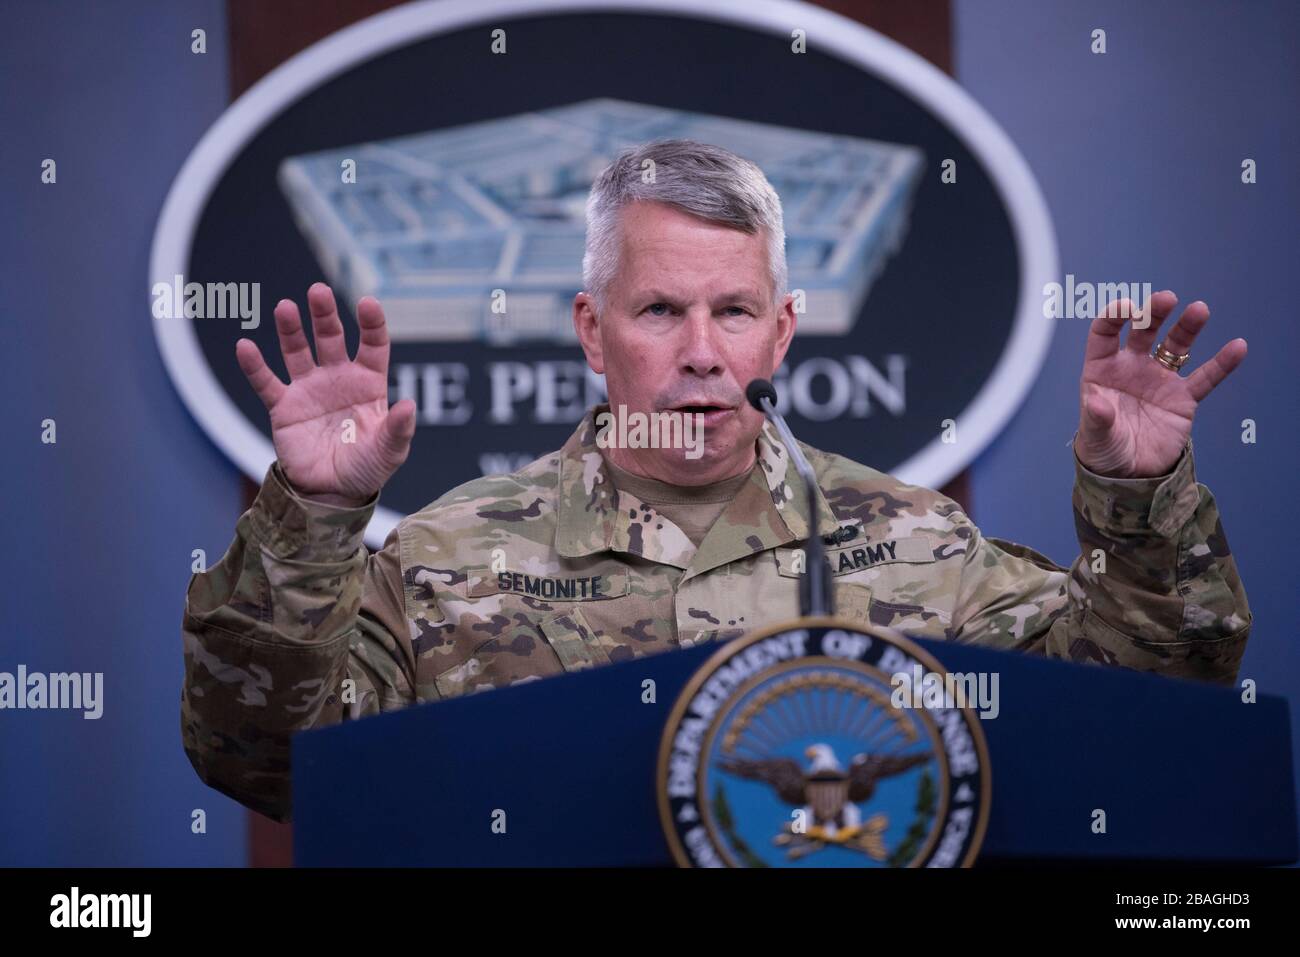 The U.S. Army Corps of Engineers, commanding general, Lt. Gen. Todd T. Semonite, briefs the press on the Corps of Engineers efforts to assist with the COVID-19 pandemic at the Pentagon March 27, 2020 in Arlington, Virginia. Stock Photo